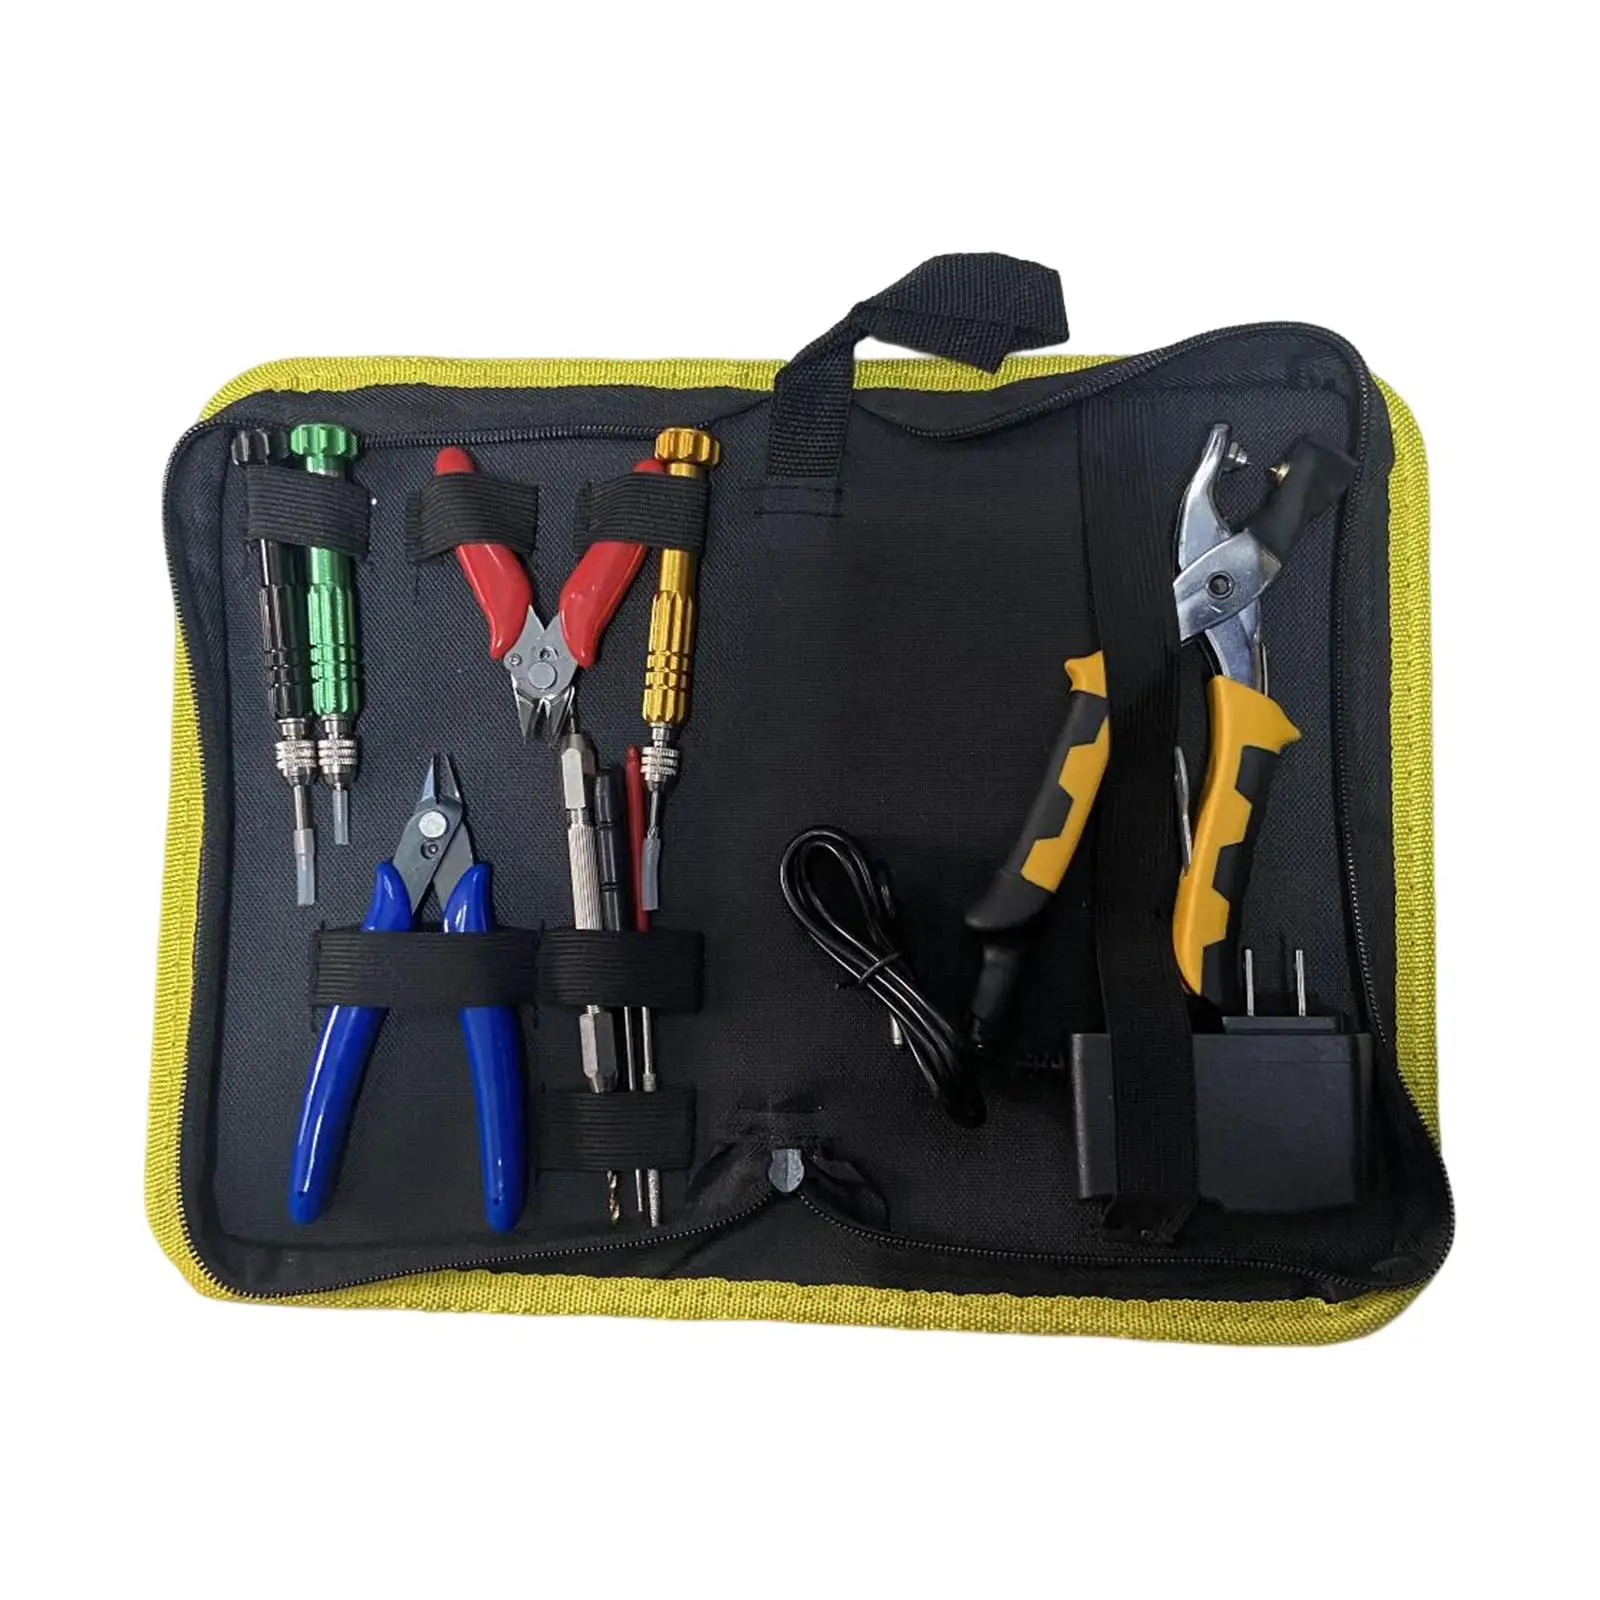 Portable Starting Stringing Clamp Tool Kit Stringing Machine Tools with Bag Badminton Racket Hot Pressure Plier for Restring